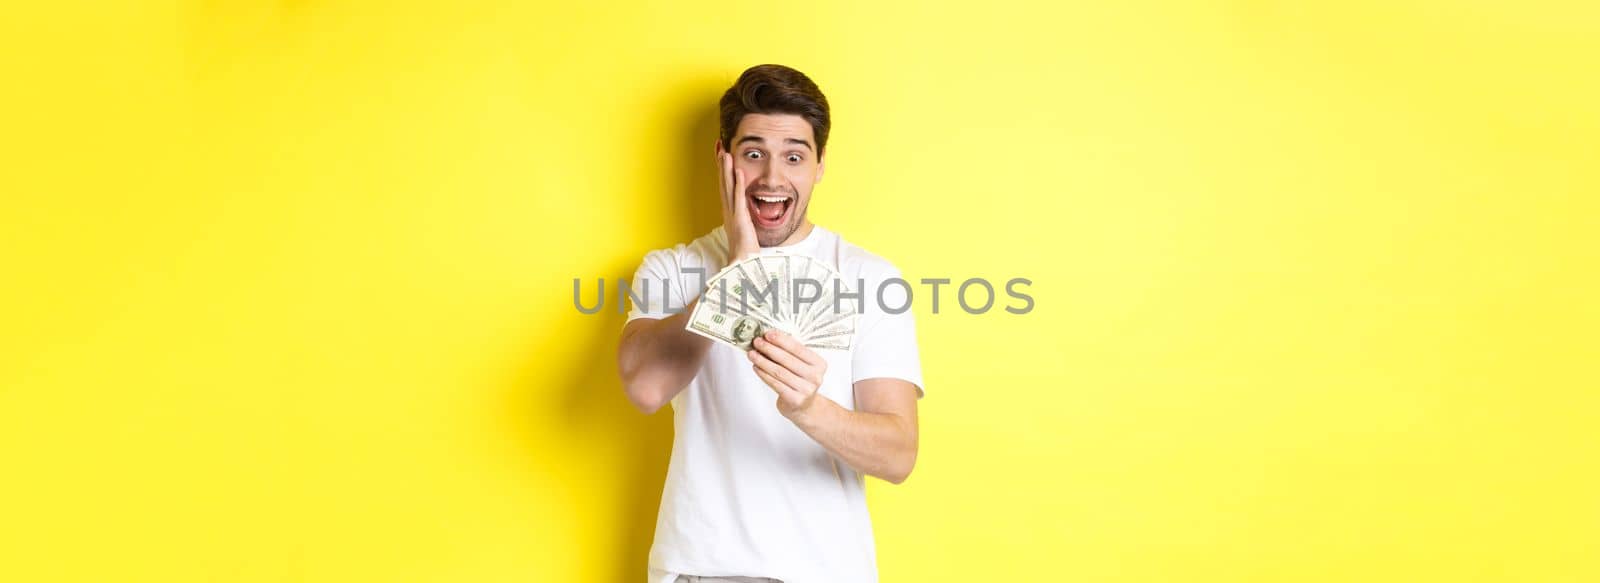 Man looking amazed at money, winning cash prize, standing against yellow background.